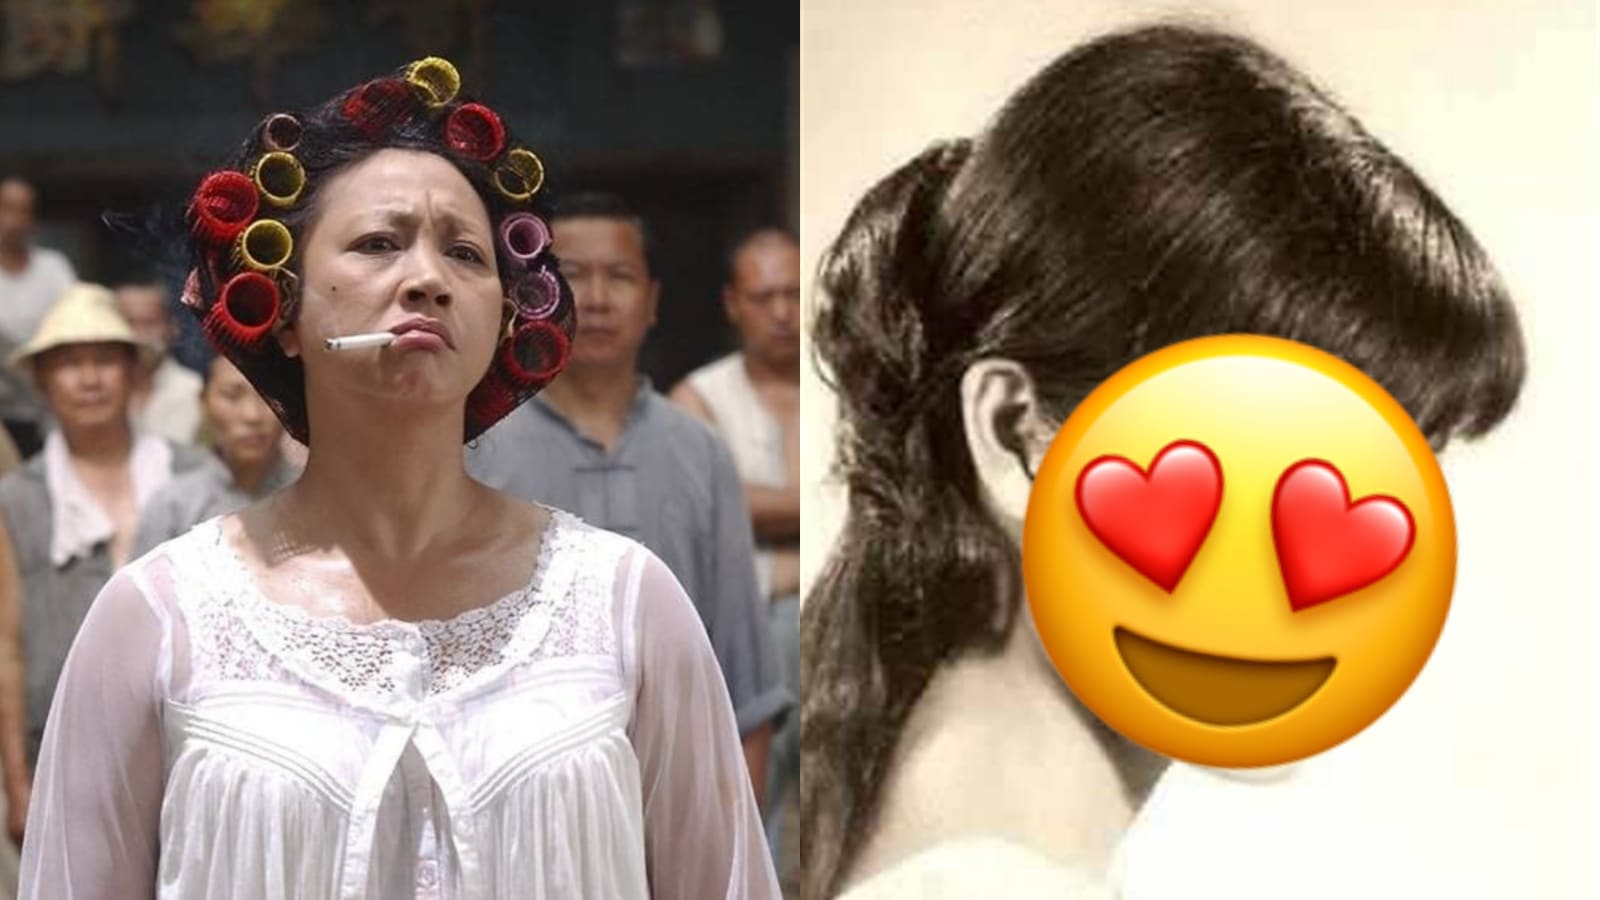 Yuen Qiu AKA The Landlady From Kungfu Hustle Was Quite The Beauty When She Was A Young Student